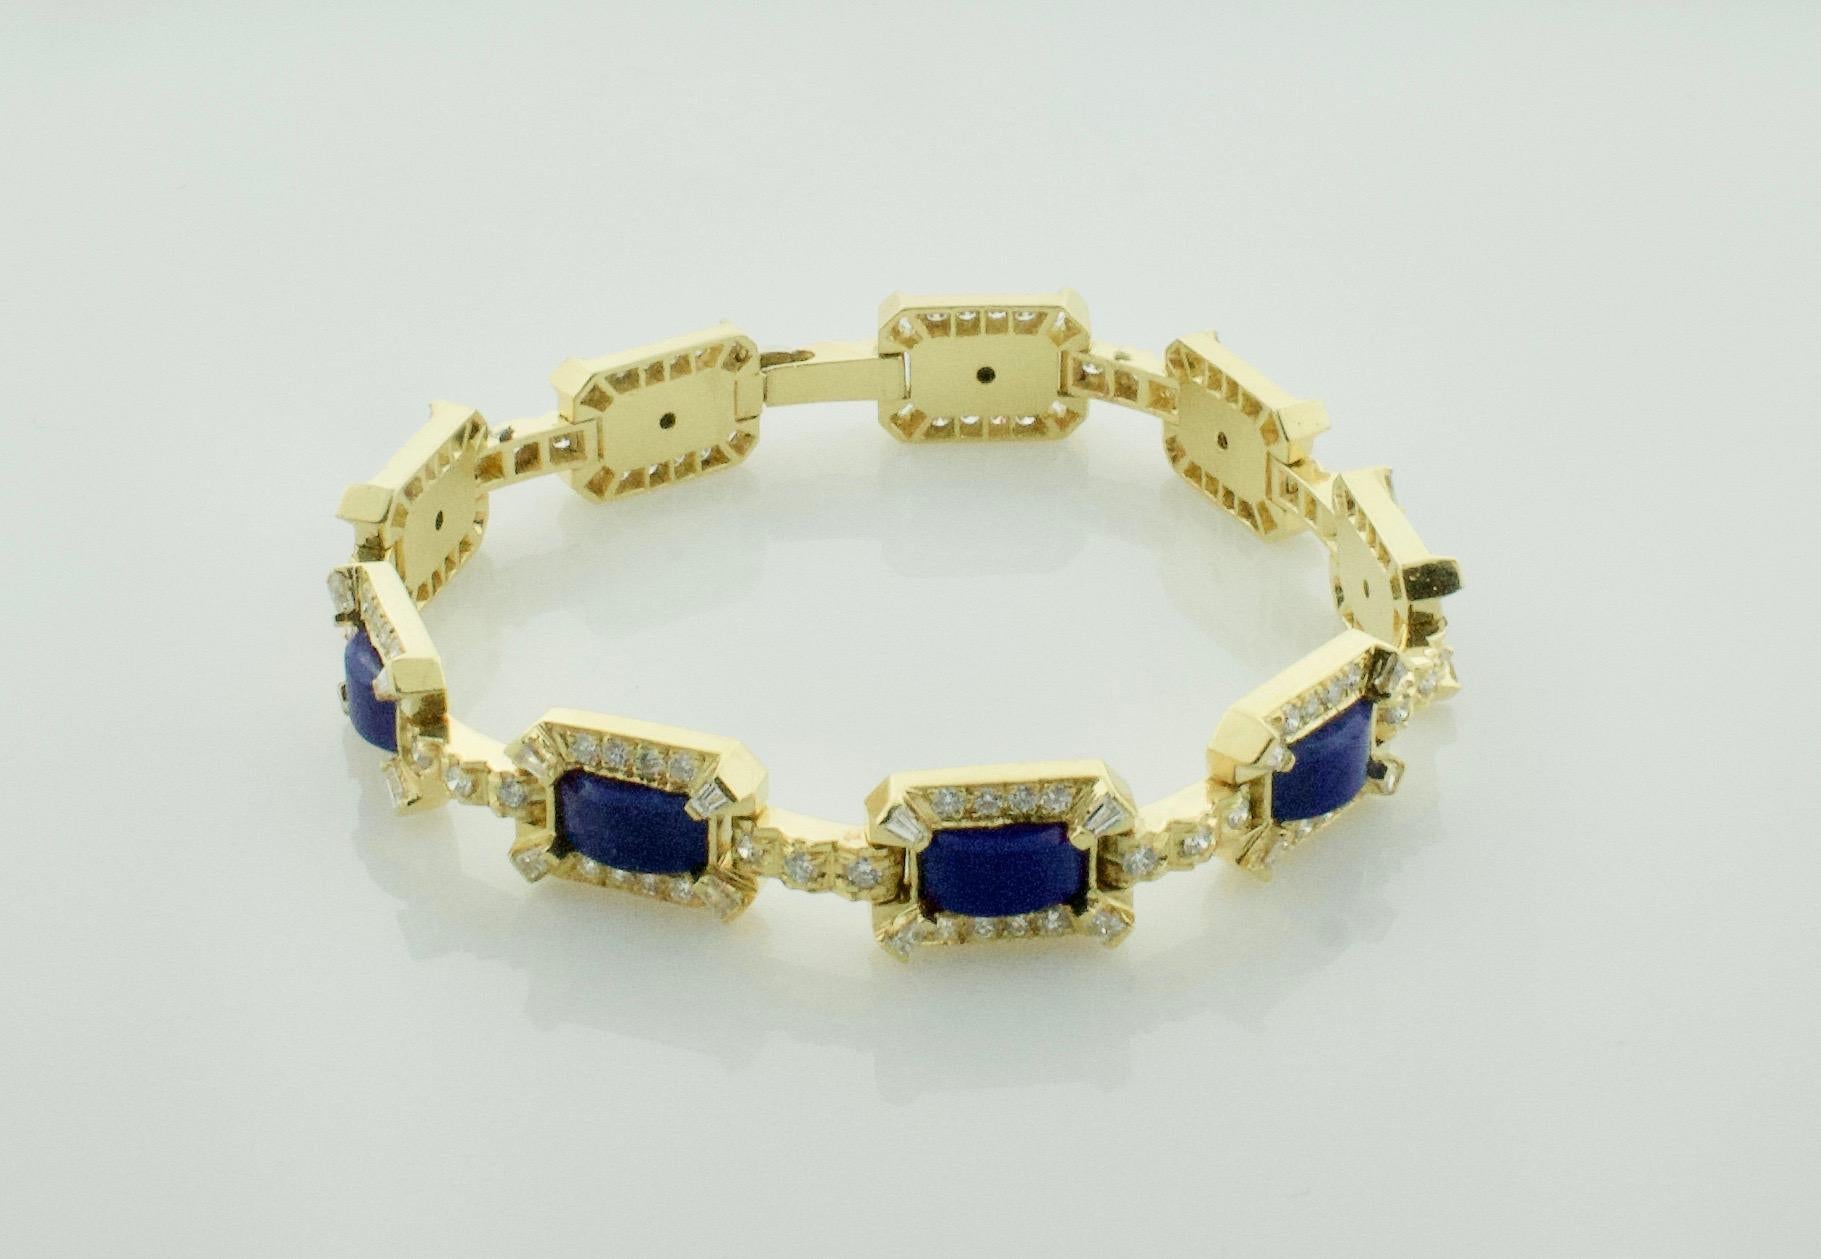    Lapis Lazuli and Diamond Bracelet in 18 Karat Yellow Gold In Excellent Condition For Sale In Wailea, HI